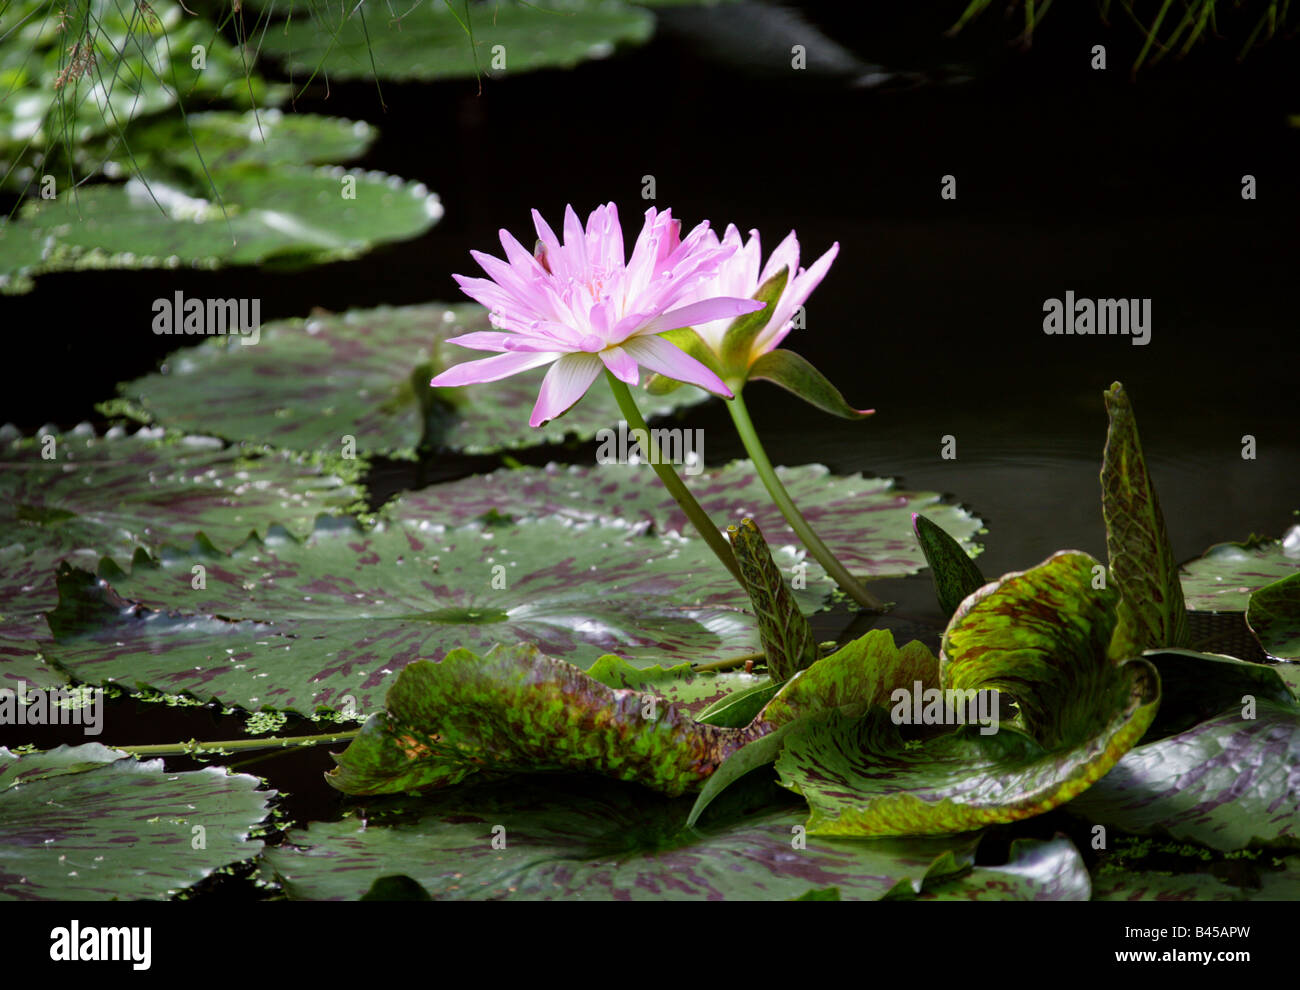 Water Lily, Nymphaea, Nymphaeaceae Banque D'Images